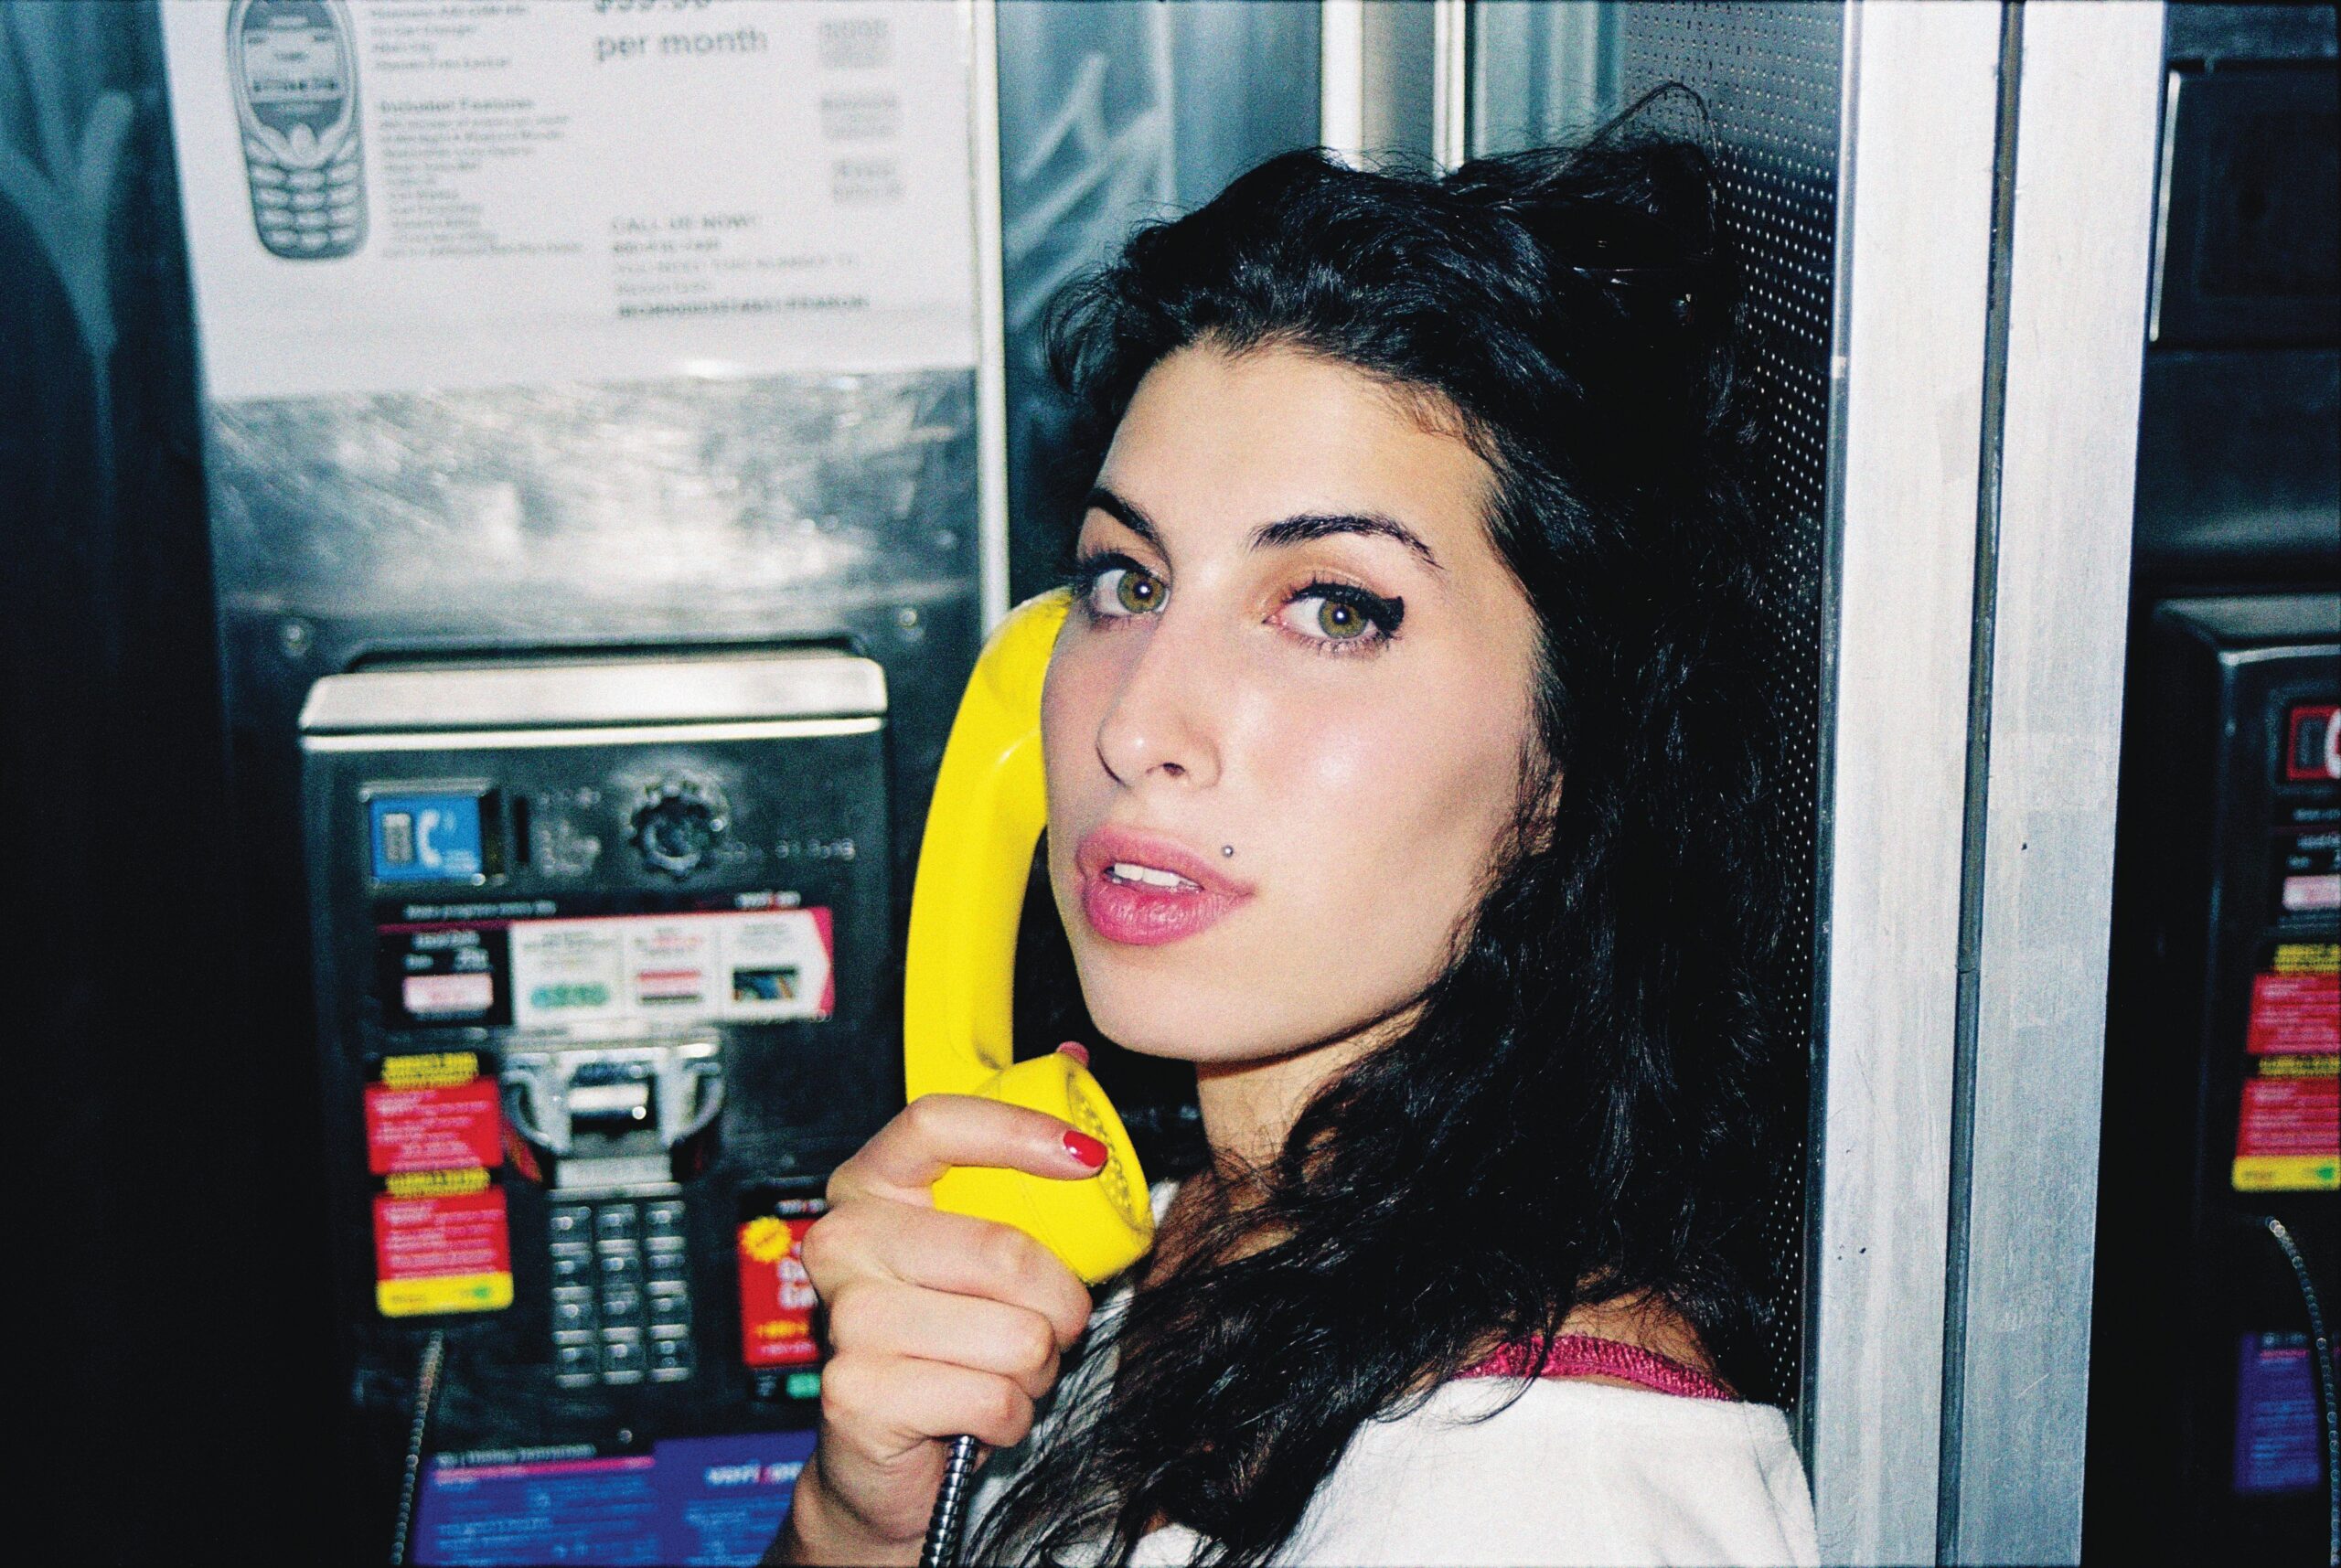 AMY WINEHOUSE EXHIBITION COMING TO AUSTRALIA